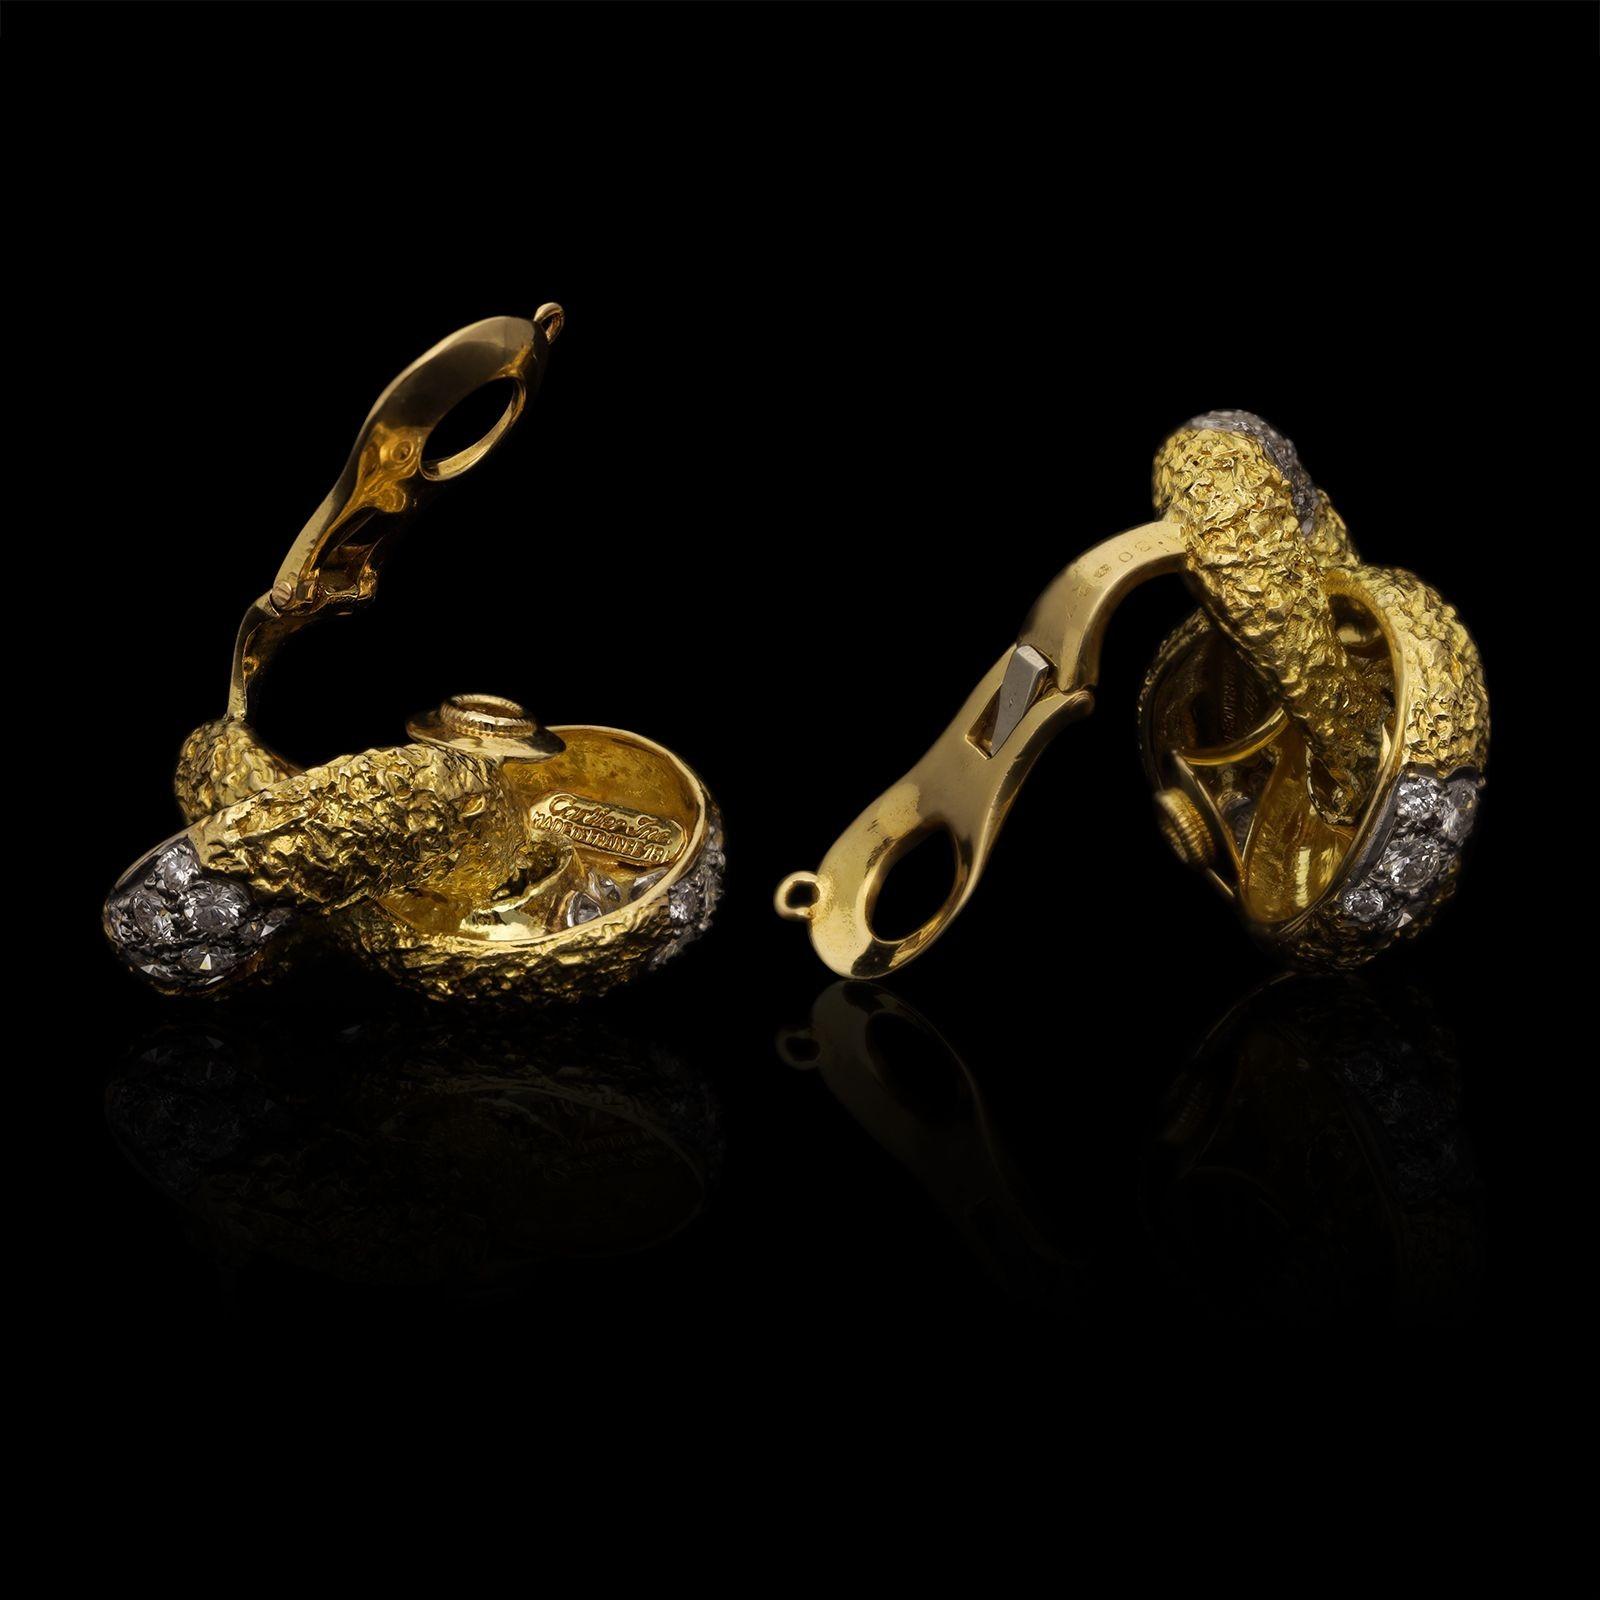 Brilliant Cut Cartier 18ct Textured Yellow Gold and Diamond Vintage Ear Clips, circa 1960s For Sale